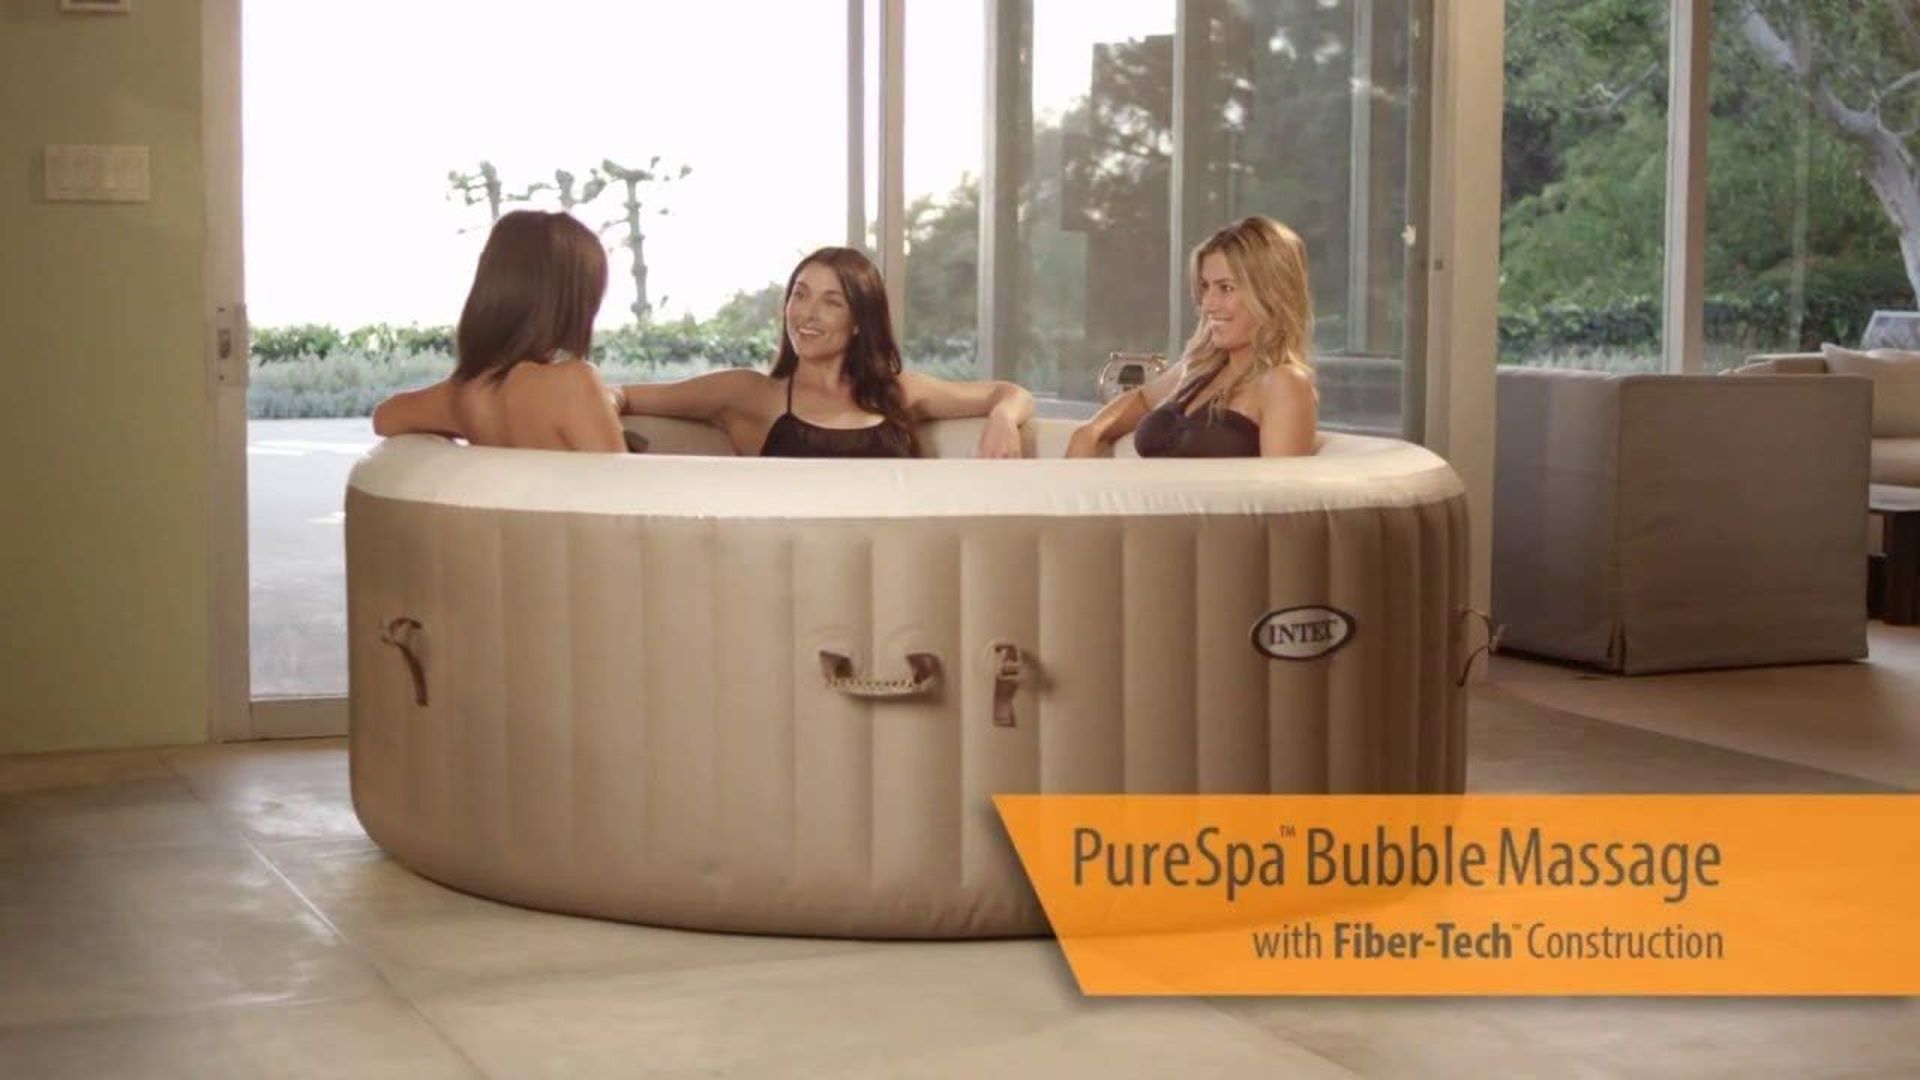 BRAND NEW INTEX PureSpa Bubble 4 Person Round. RRP £499.99 EACH. There's nothing like a soothing, - Image 3 of 7